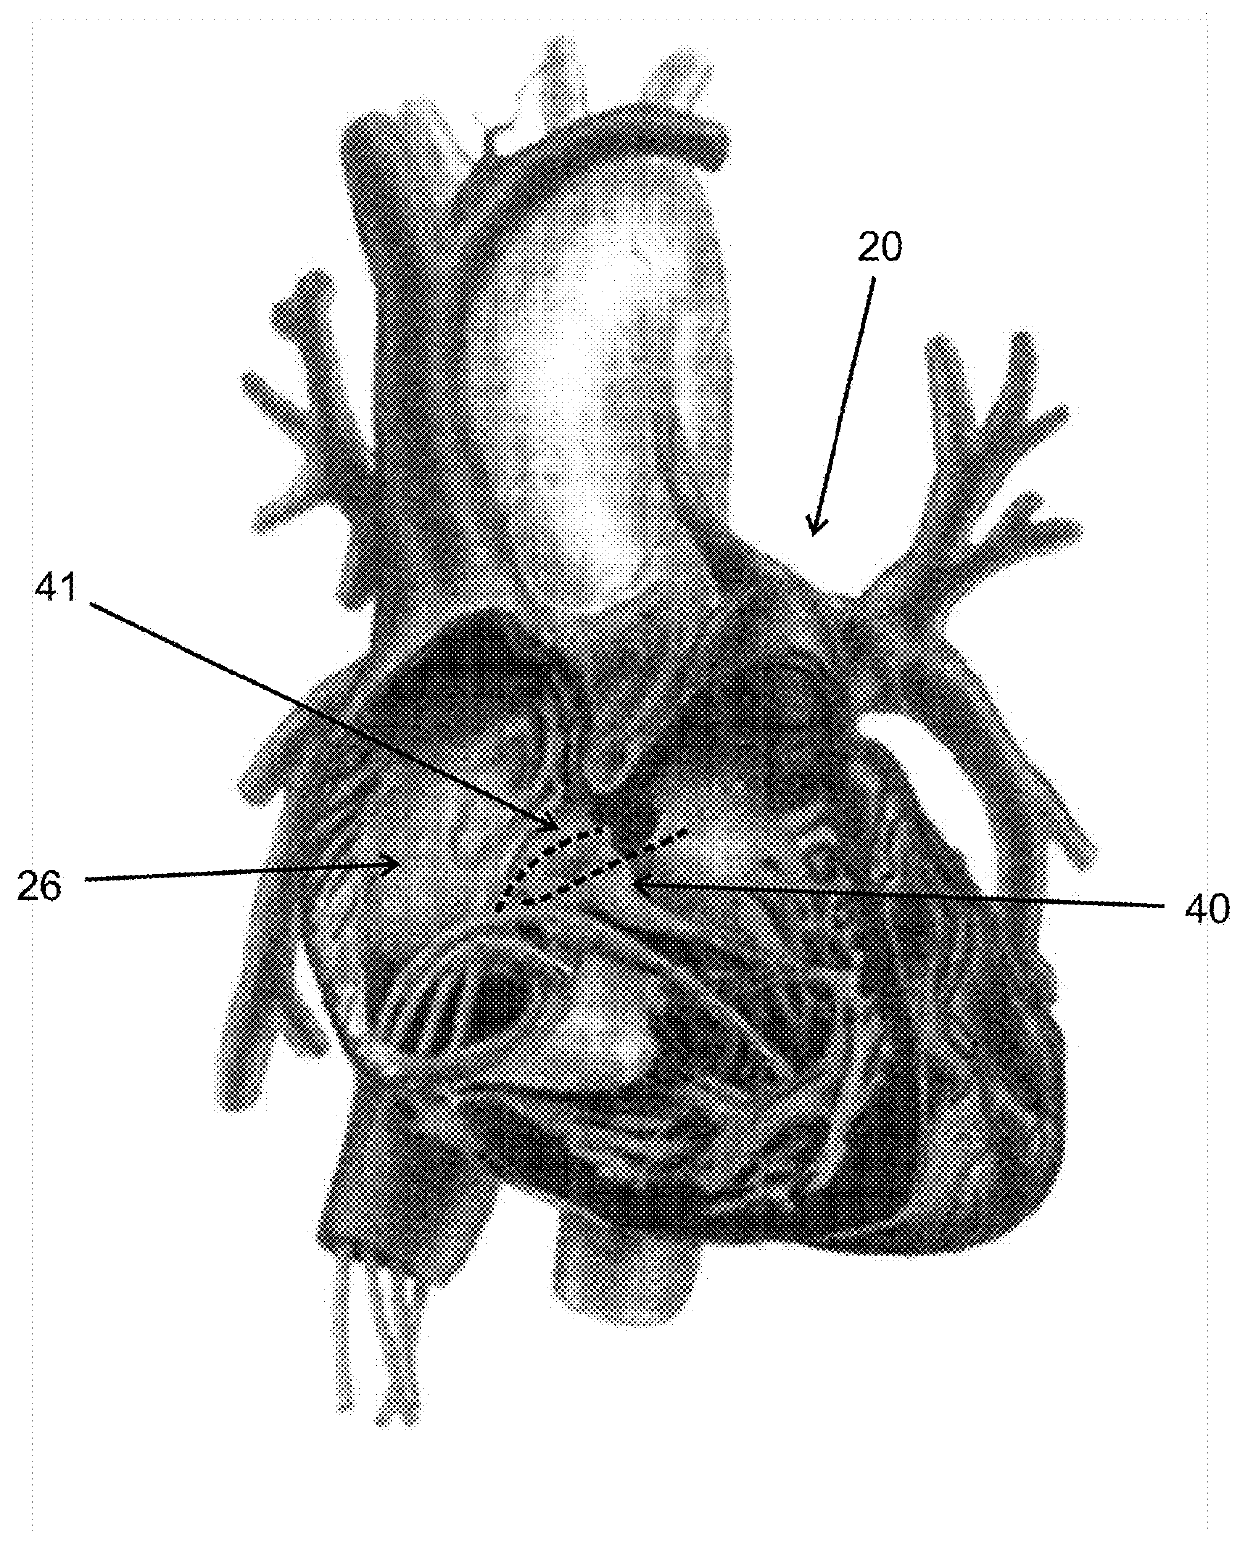 Cardiac stimulation of atrial-ventricle pathways and/or associated tissue